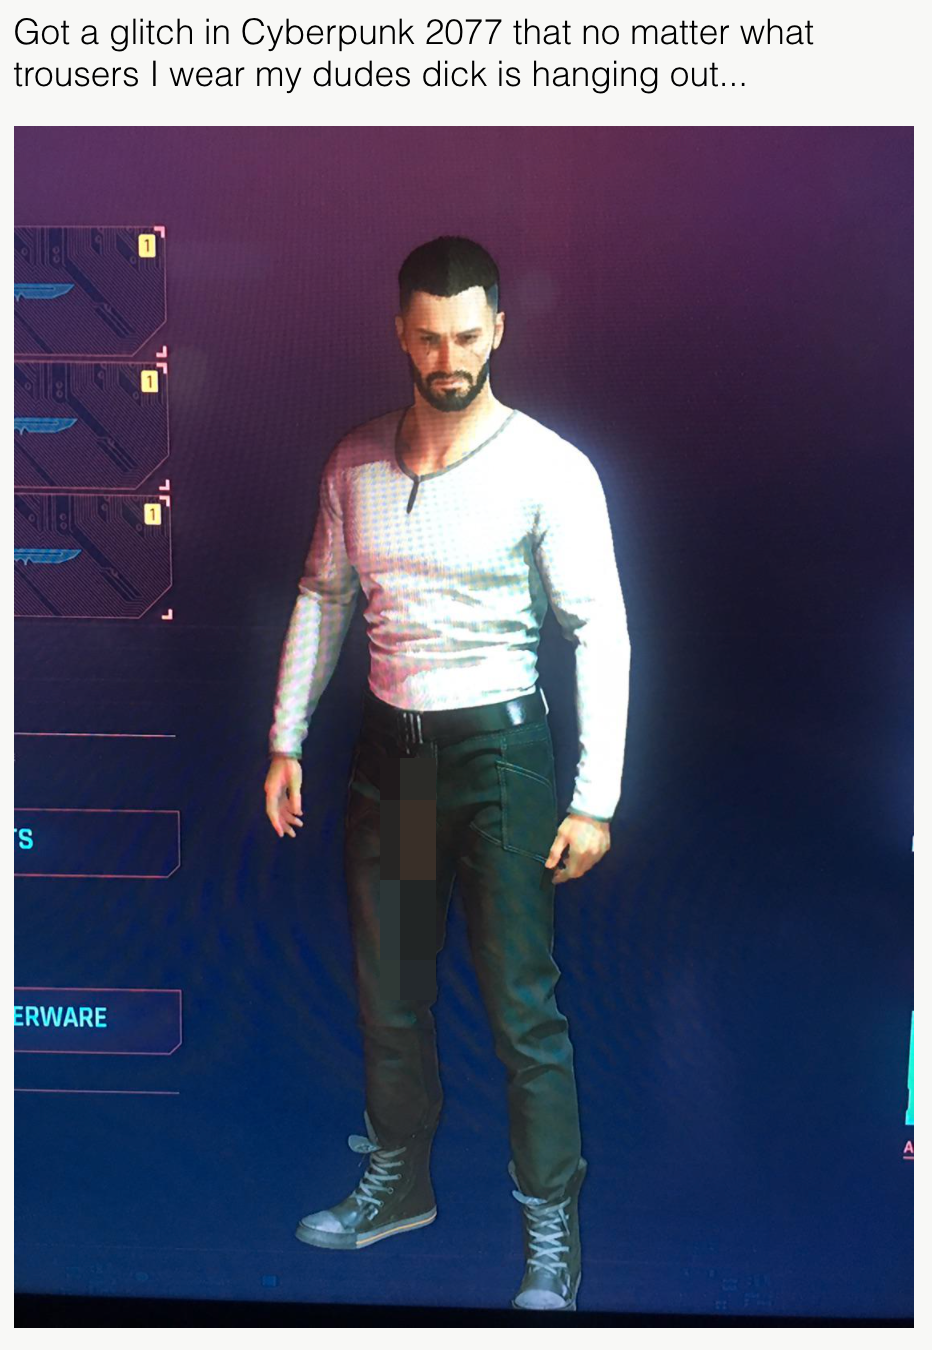 funny gaming memes - standing - Got a glitch in Cyberpunk 2077 that no matter what trousers I wear my dudes dick is hanging out... Erware